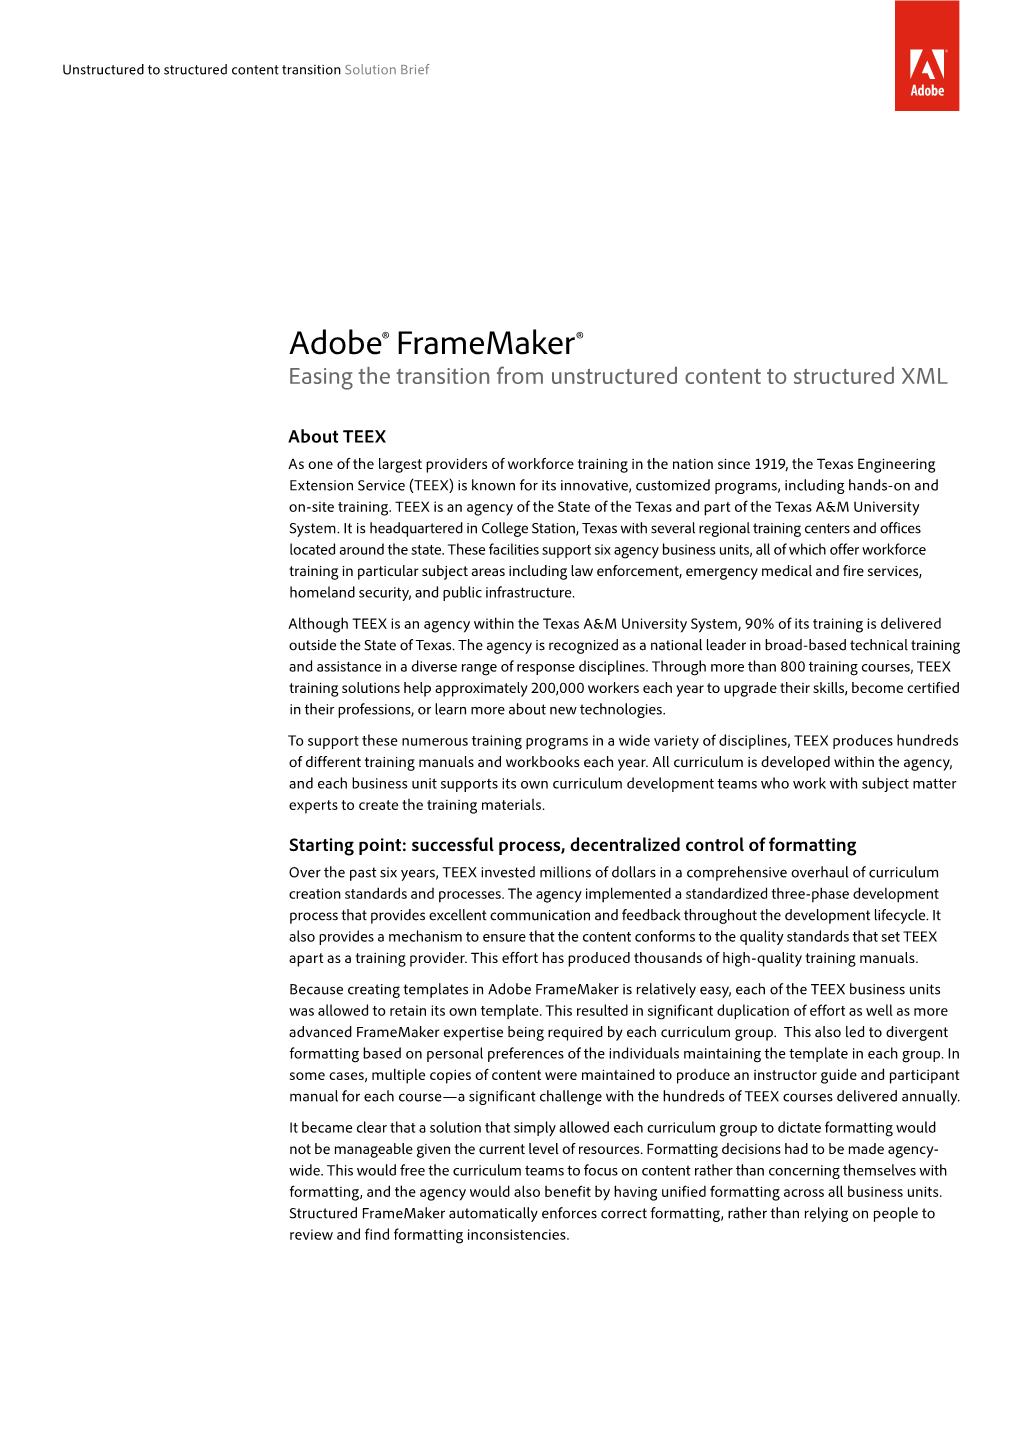 Adobe® Framemaker® Easing the Transition from Unstructured Content to Structured XML